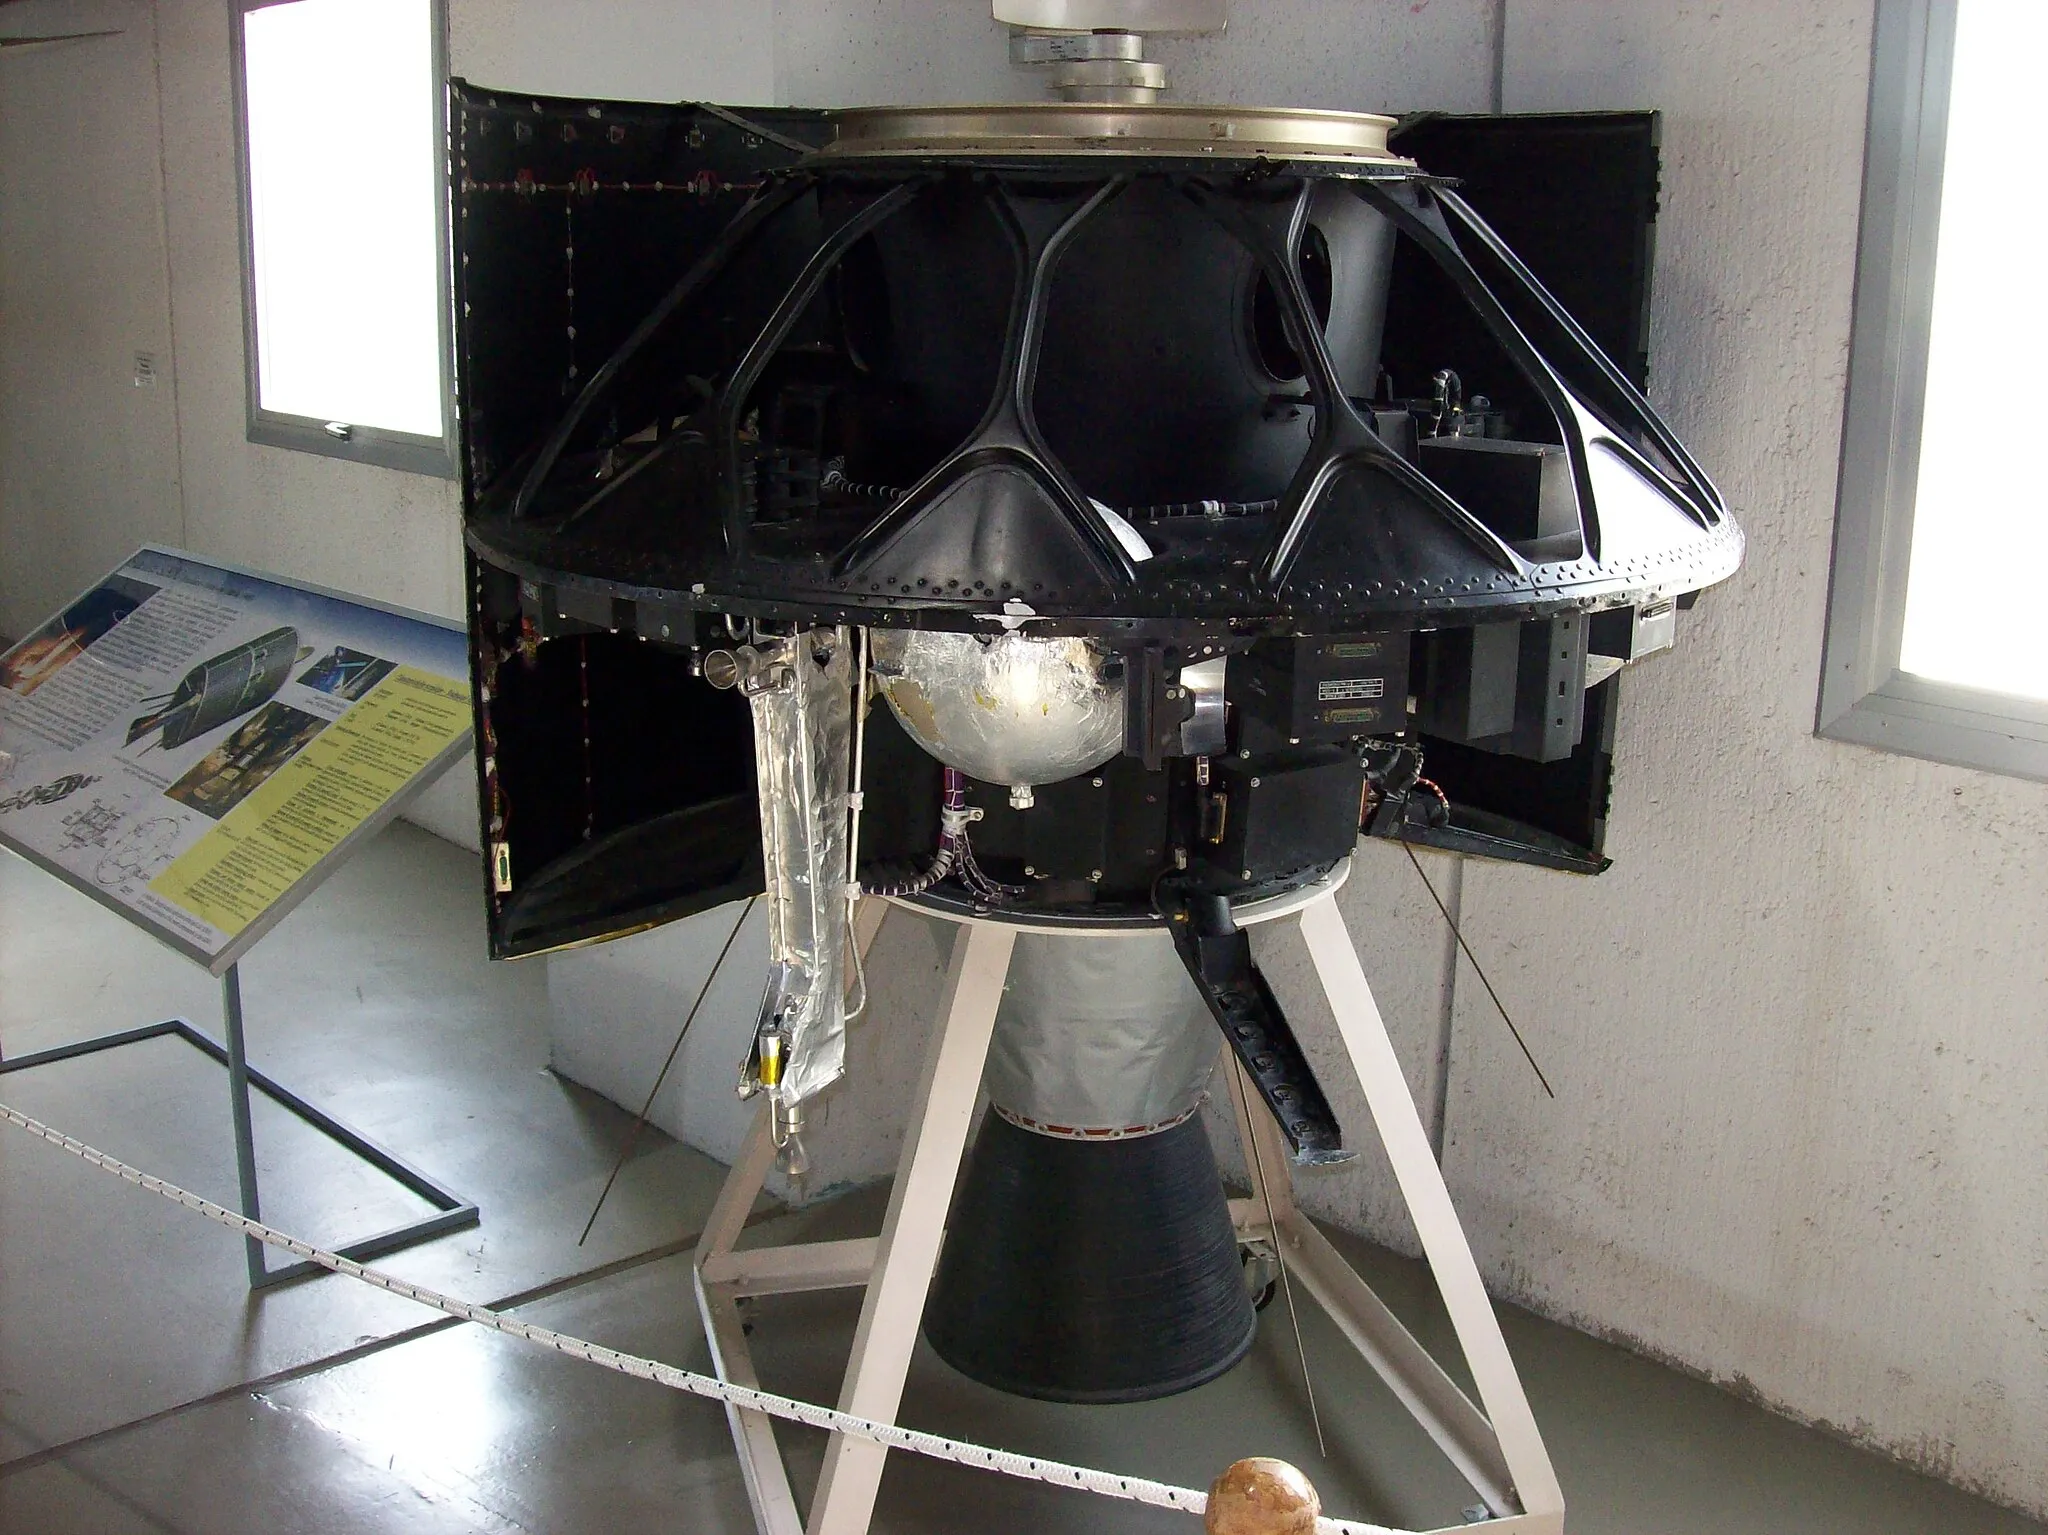 Photo showing: Cutout of the Italian research Satellite SIRIO-1, first launched in 1977 by National Research Council, then operated by the Italian Space Agency